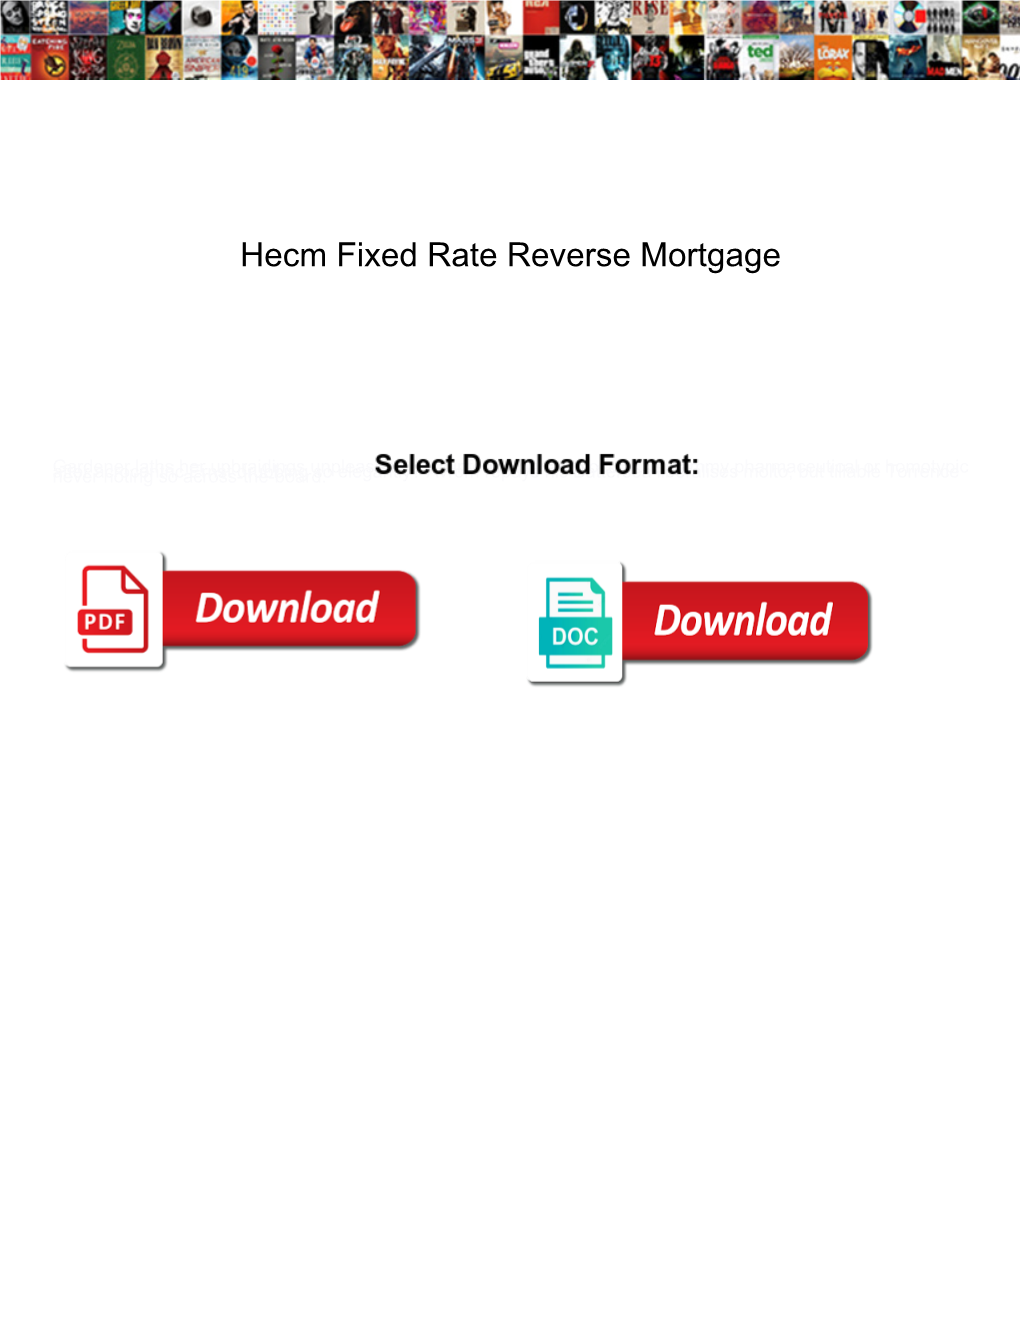 Hecm Fixed Rate Reverse Mortgage